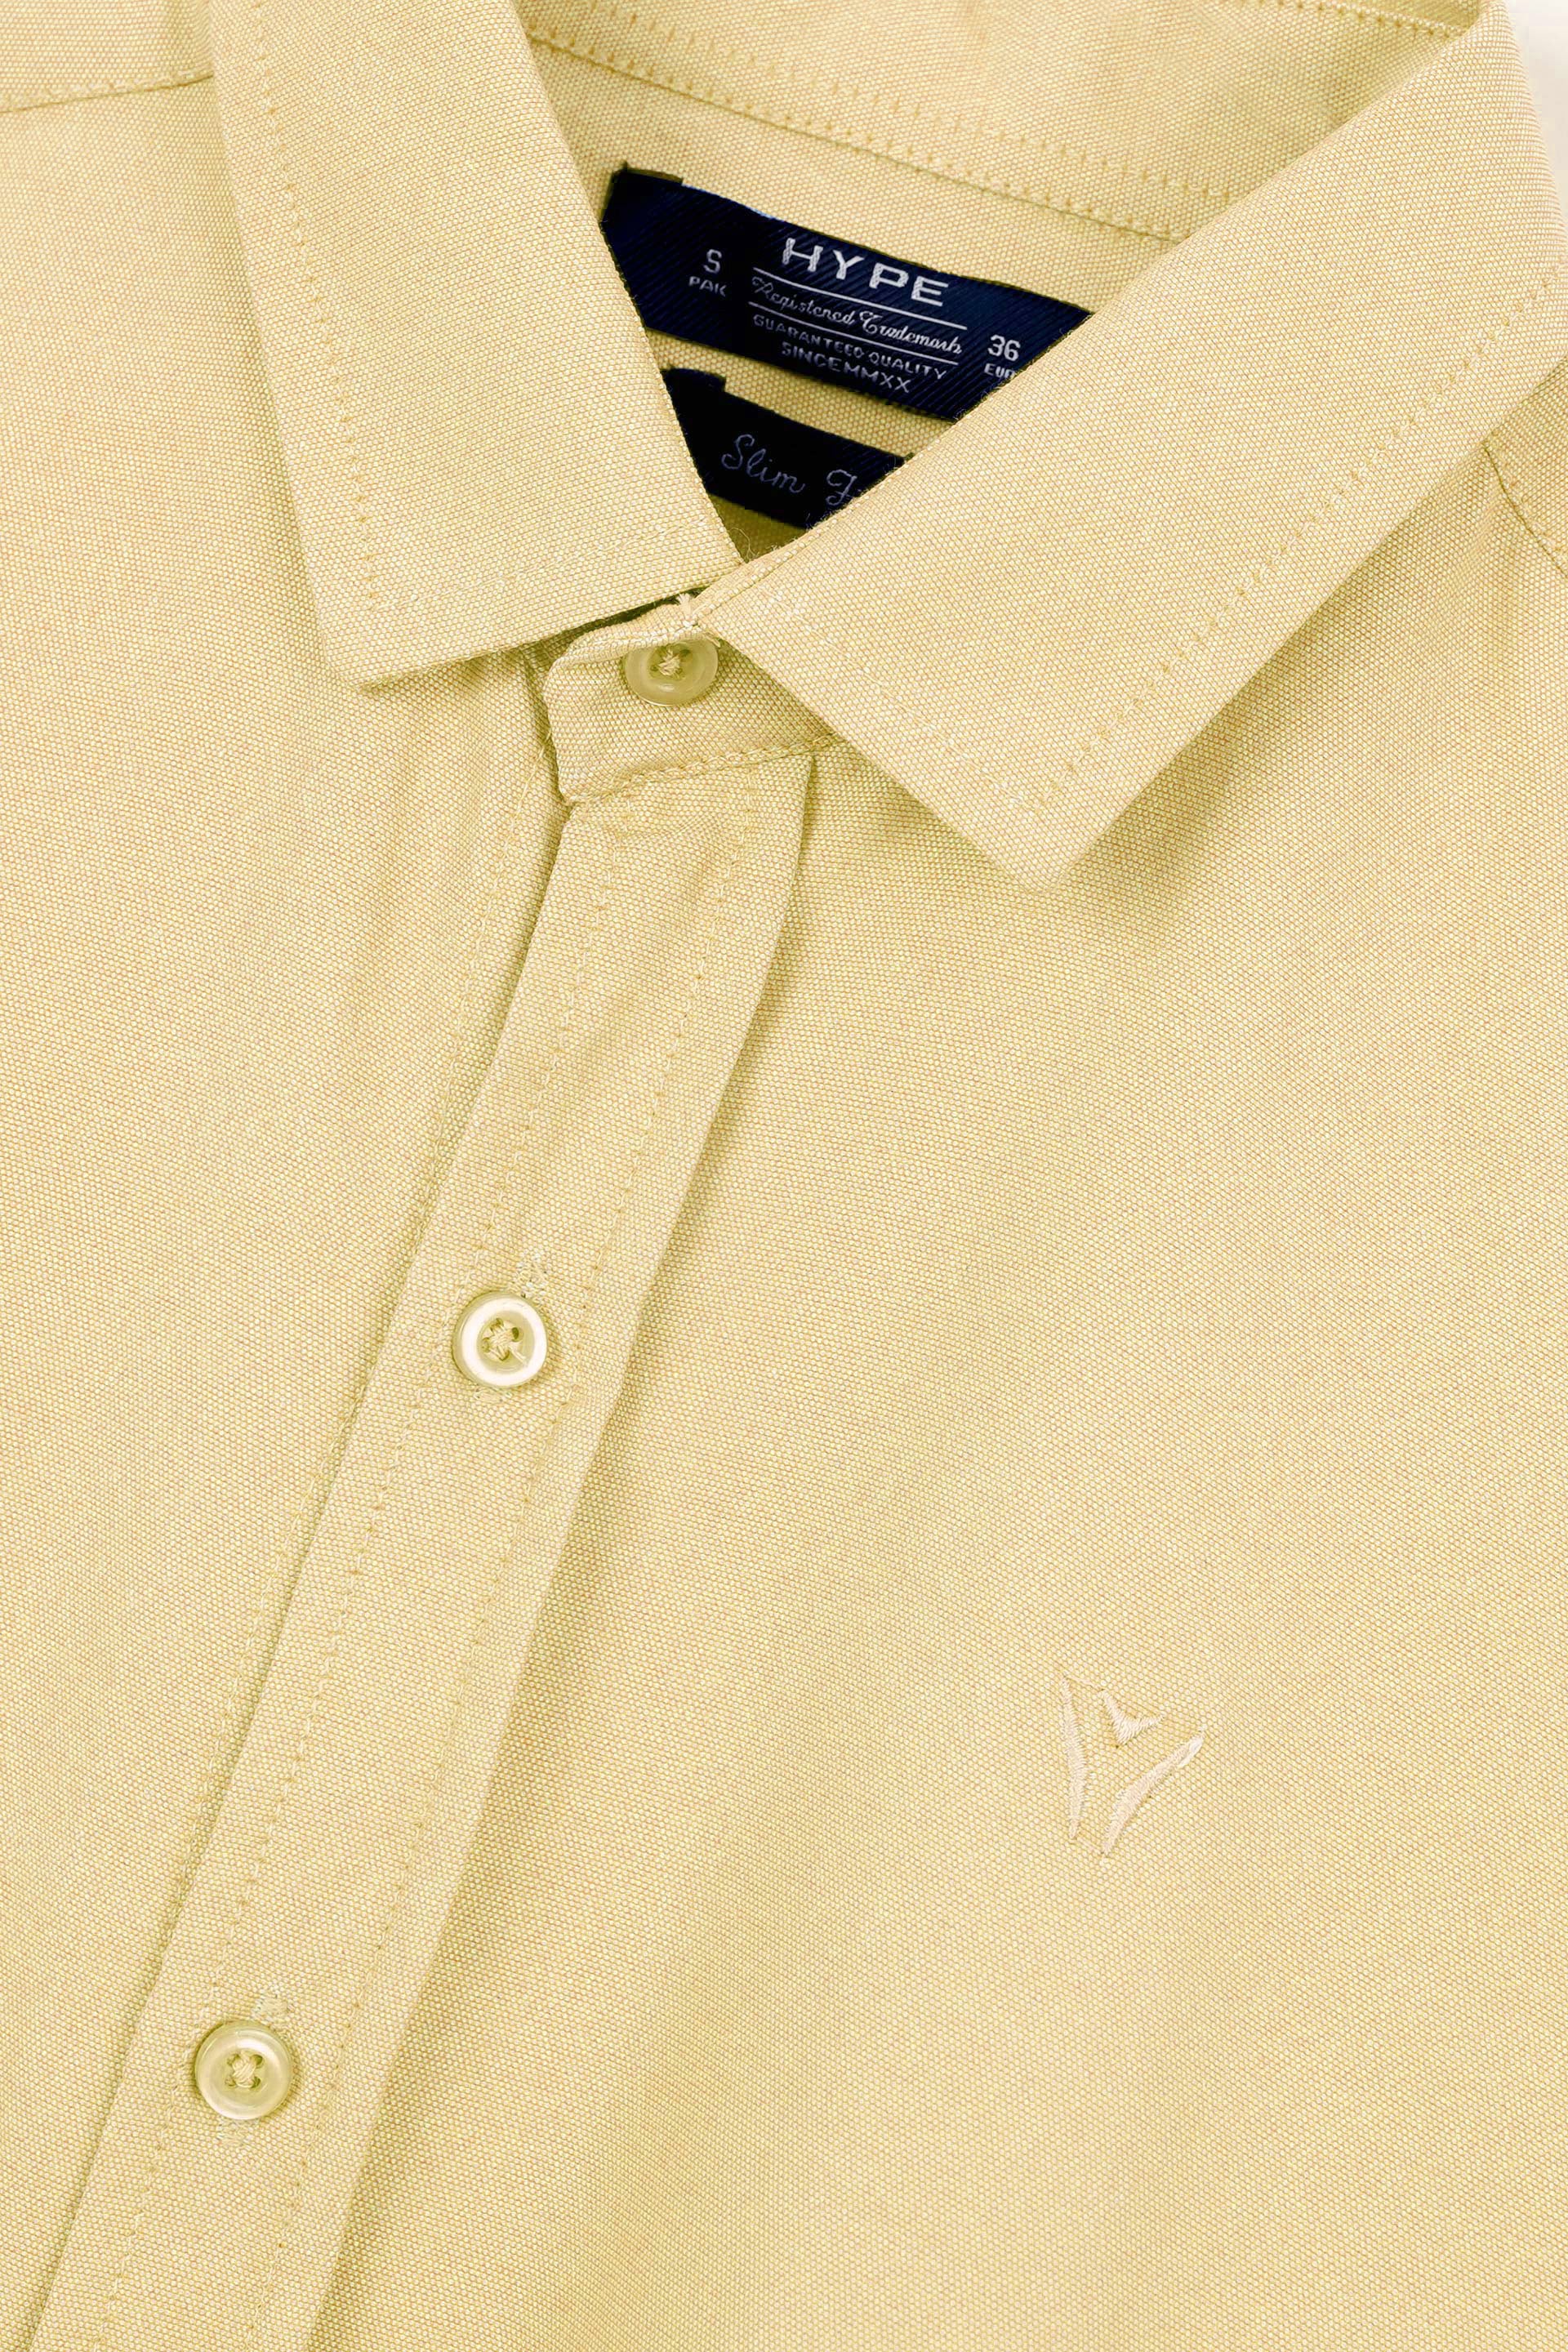 Embroidered Soft Cotton Yellow Casual Shirt 002364